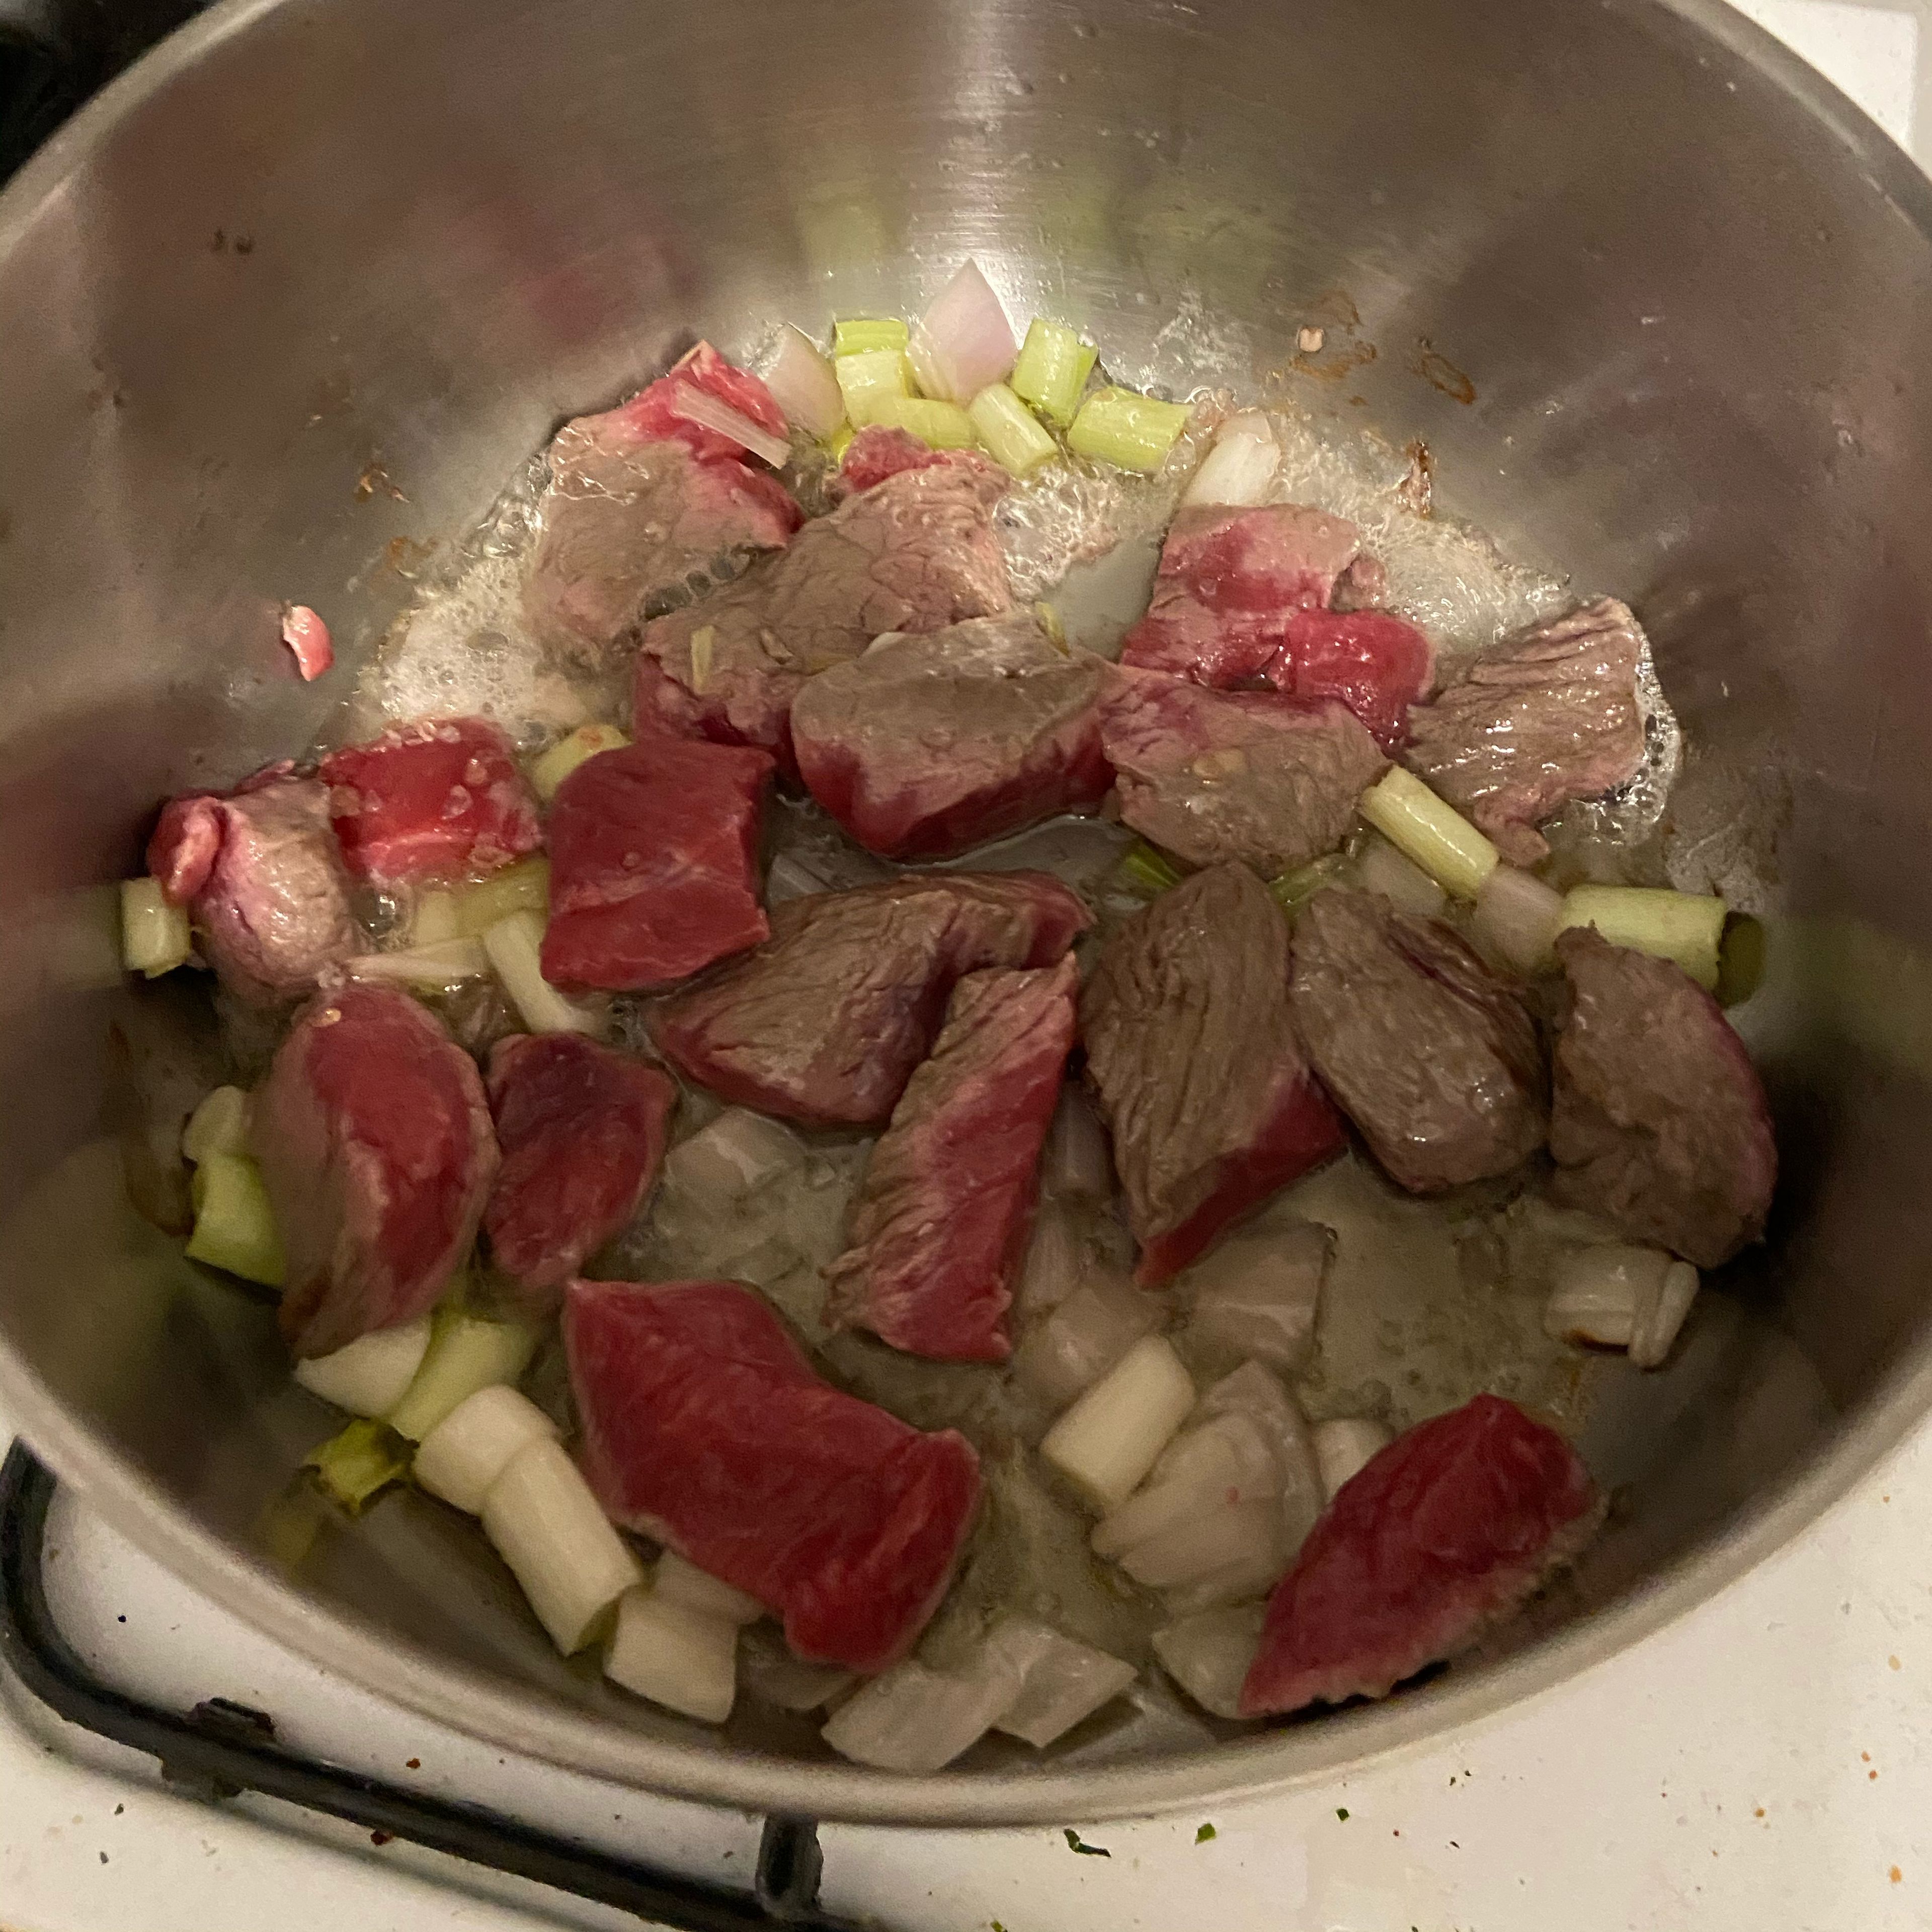 Sauté your meat in onion and garlic until it’s not red on the outside. I used beef chucks but lamb meat is the traditional way to go.